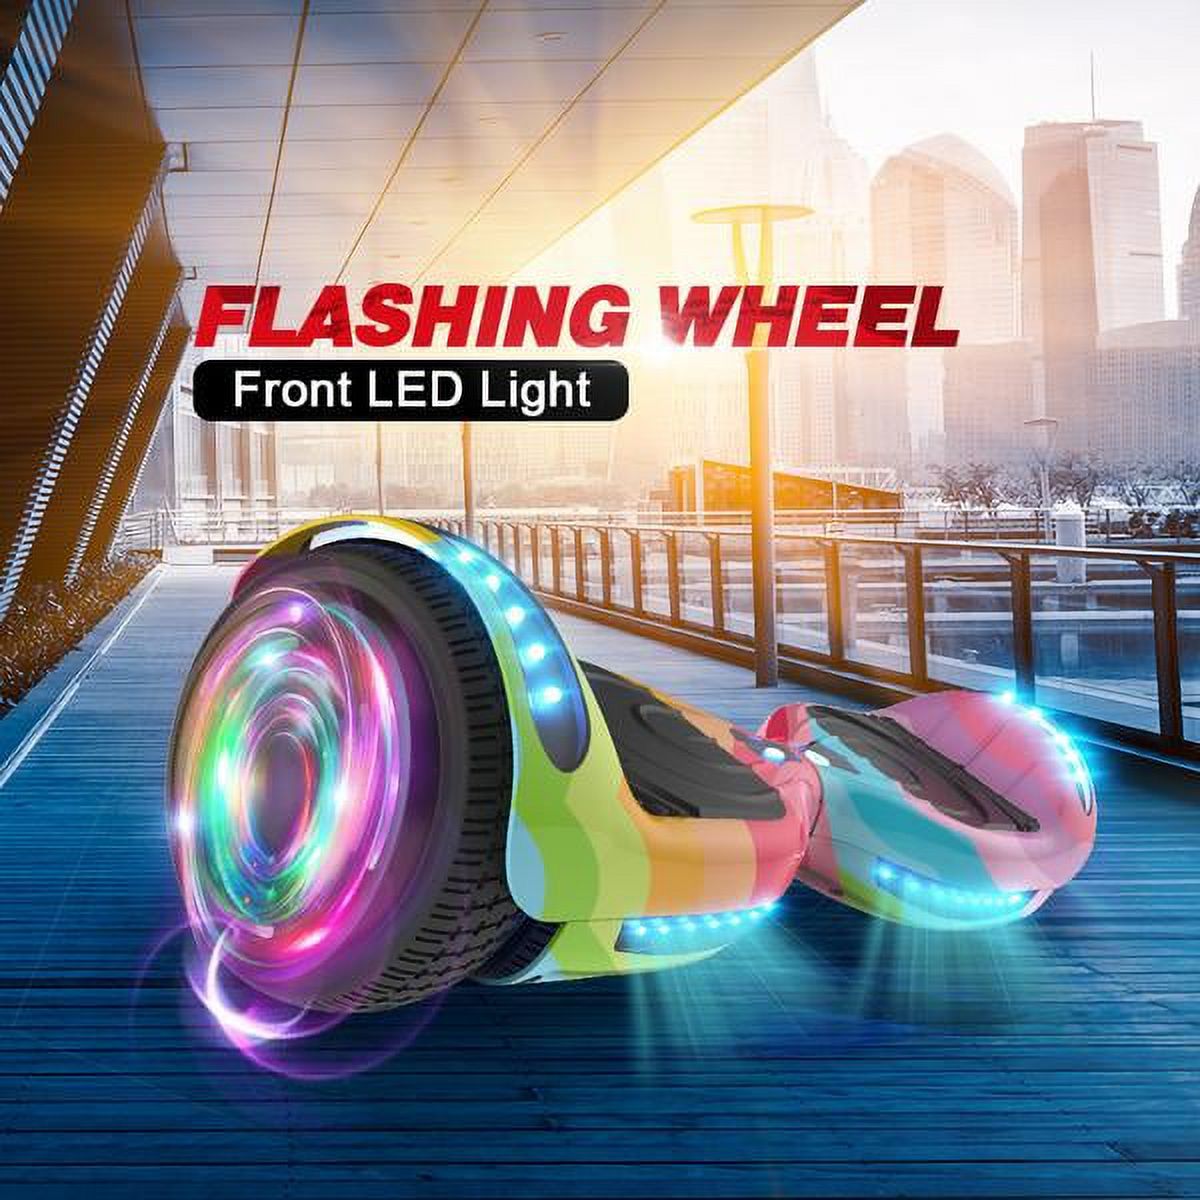 Flash Wheel Hoverboard 6.5" Bluetooth Speaker with LED Light Self Balancing Wheel Electric Scooter, Rainbow Wave - image 4 of 8